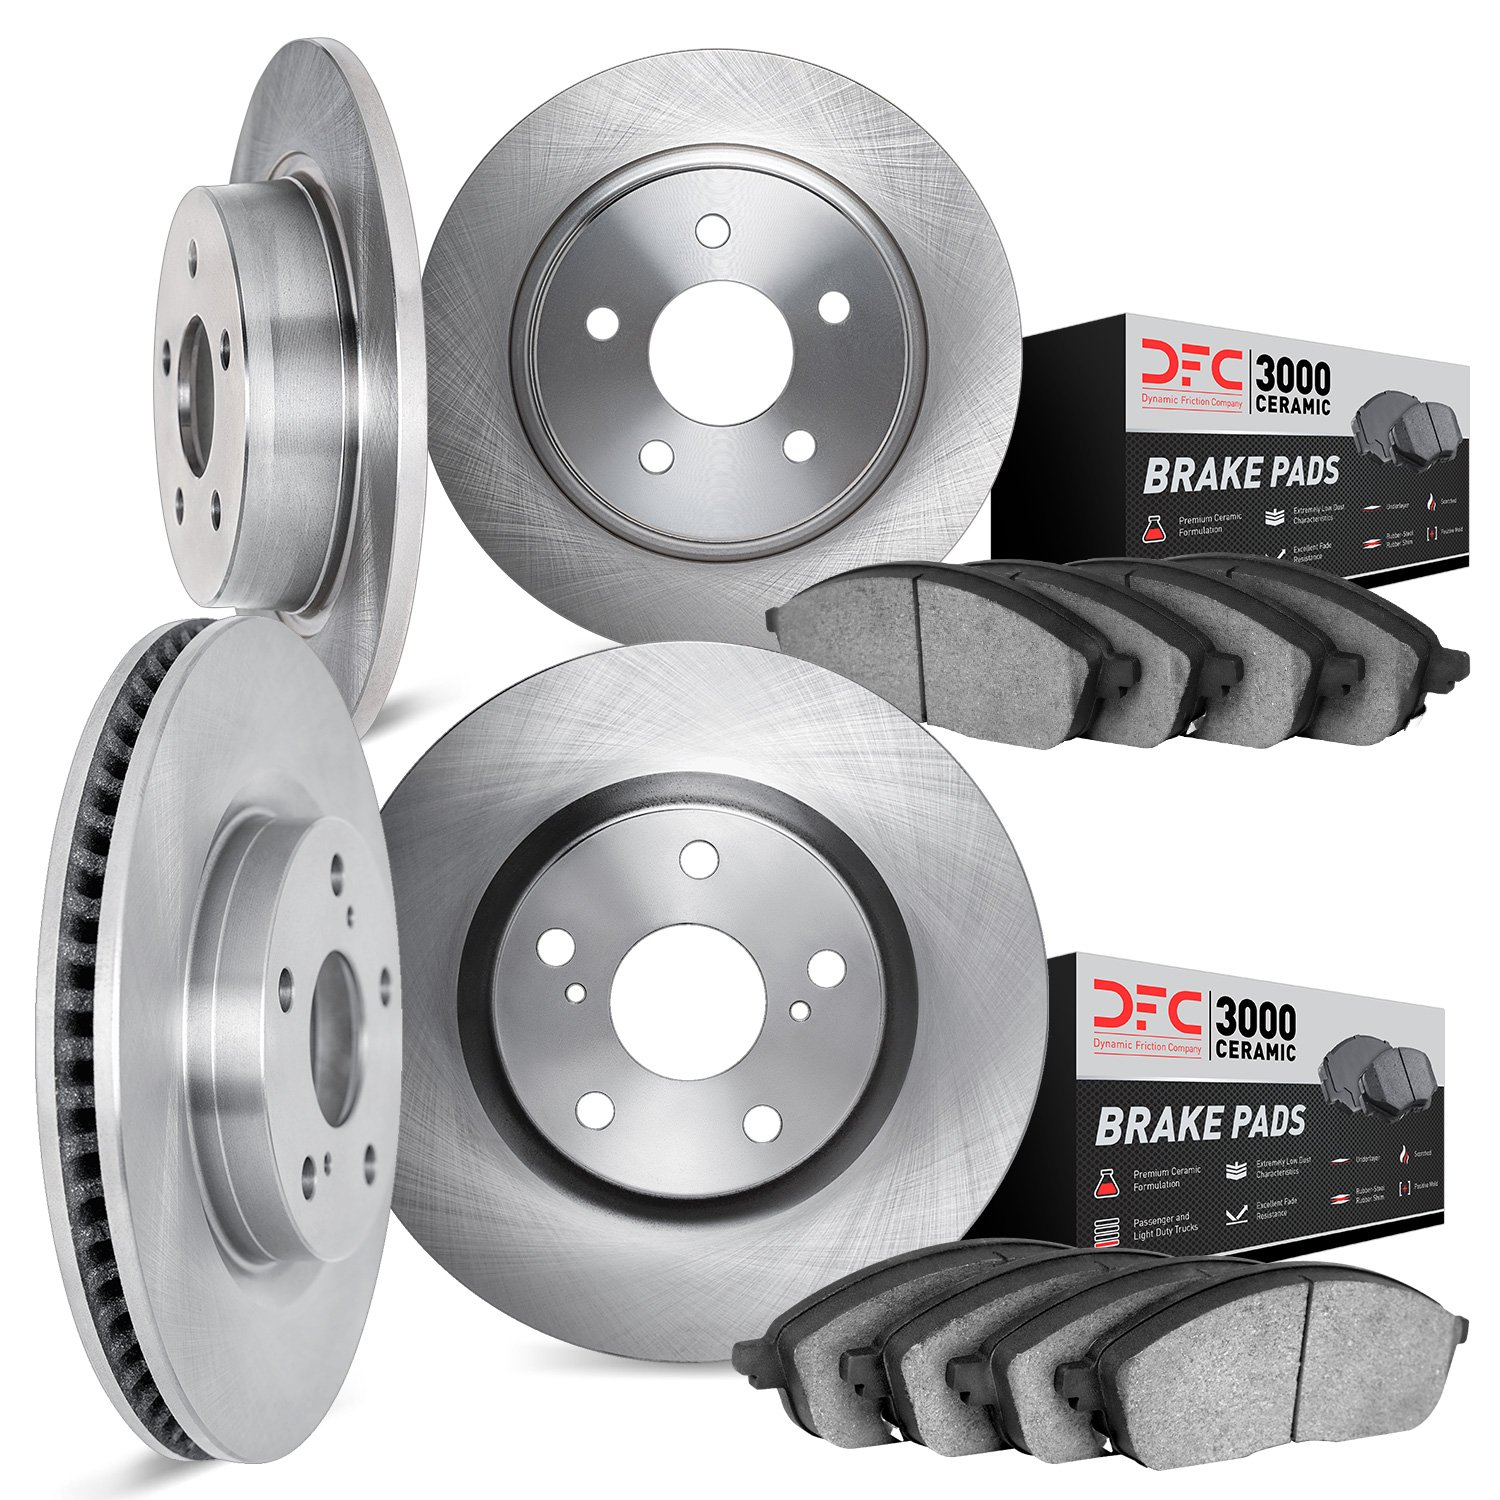 6304-76100 Brake Rotors with 3000-Series Ceramic Brake Pads Kit, 2018-2018 Lexus/Toyota/Scion, Position: Front and Rear